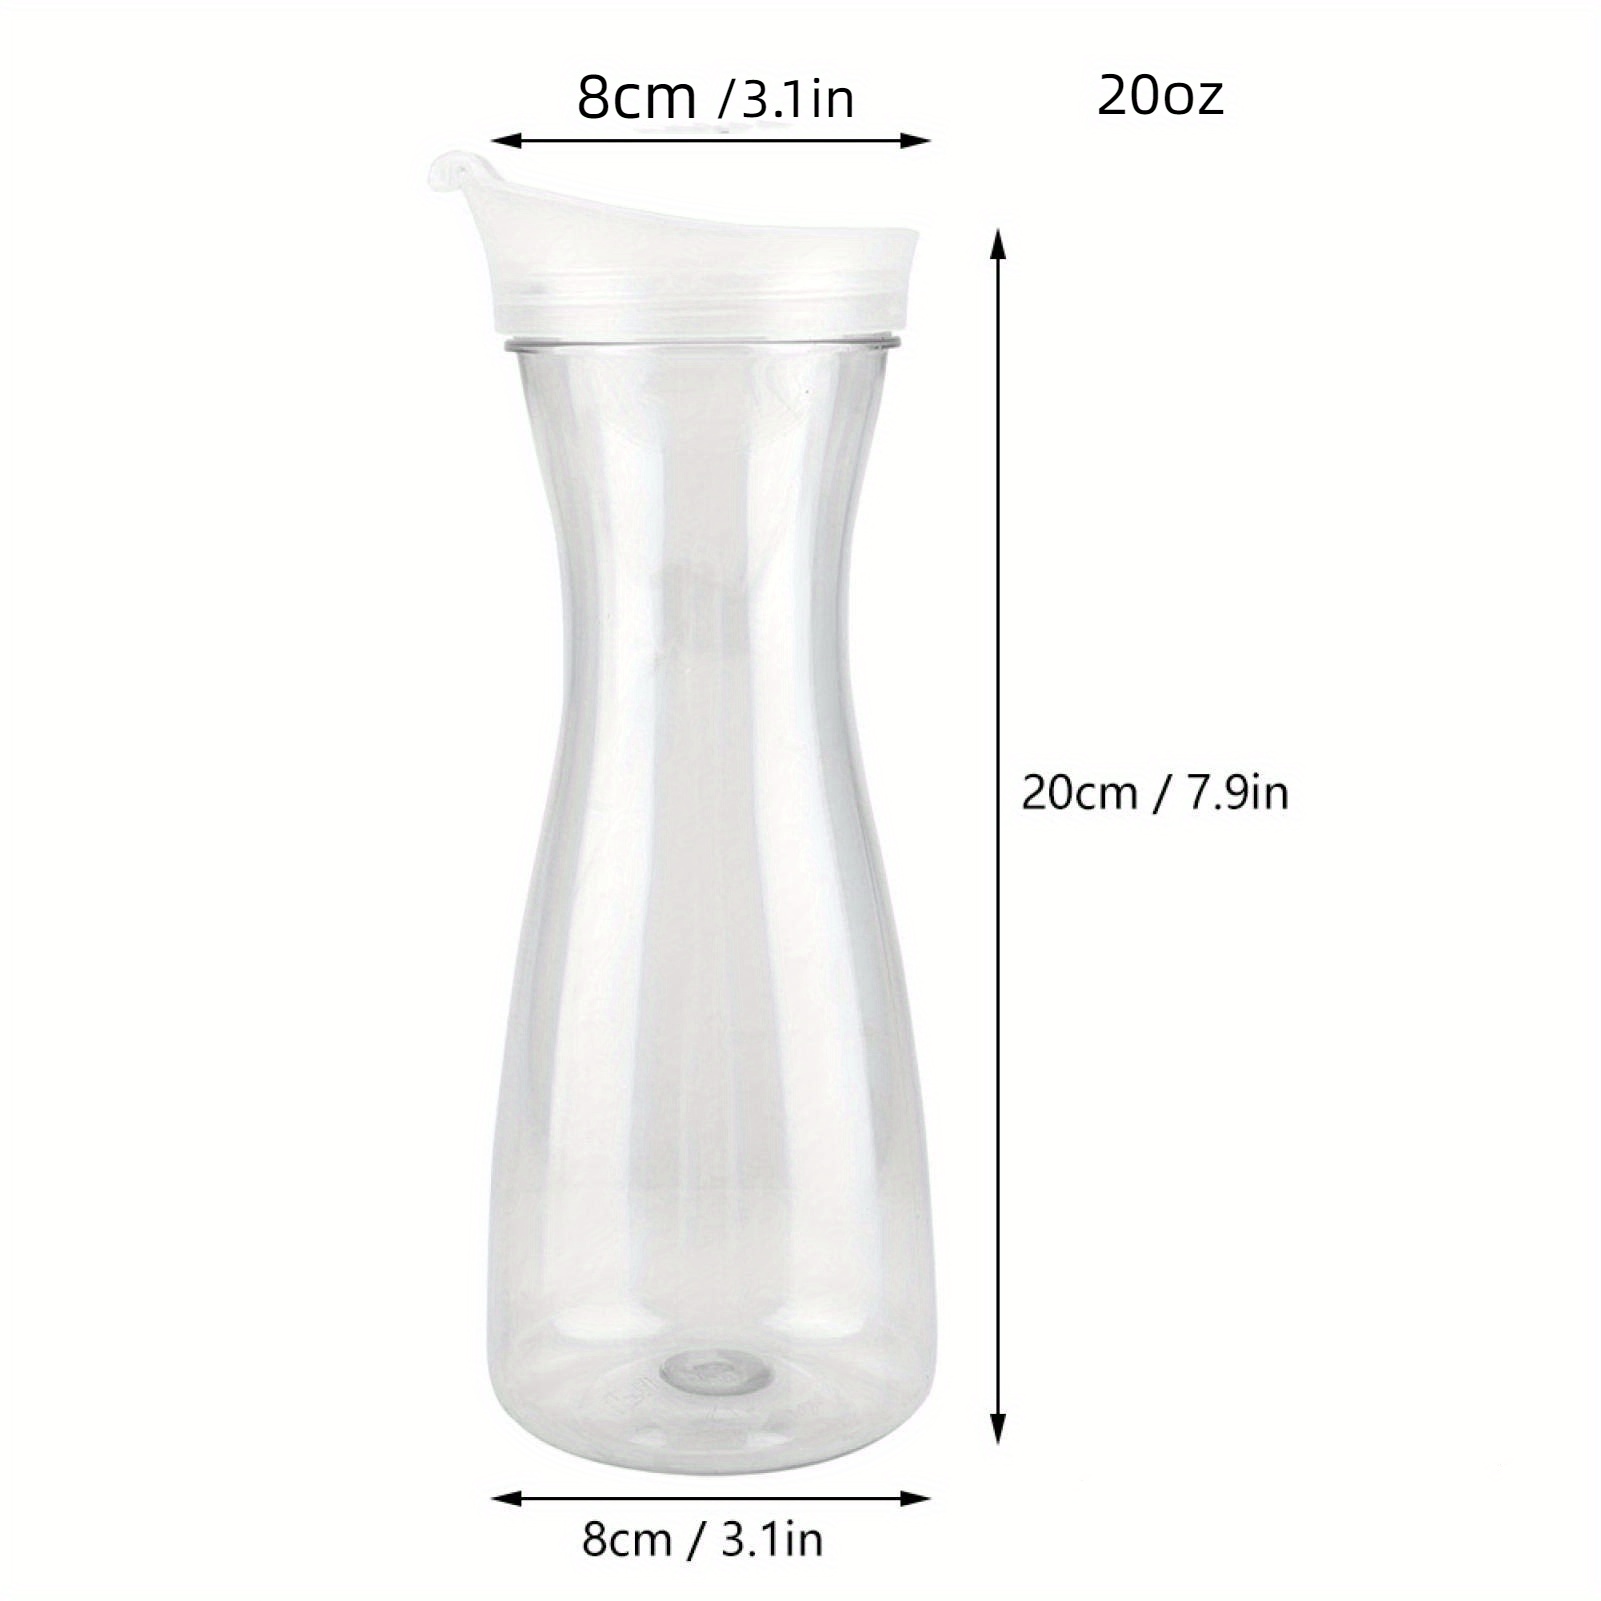 Water Carafe 20/33/54oz, Clear Acrylic Juice Drink Pitcher Carafe Jug with  Plastic Lid for Bar Home Restaurant Use(20oz)